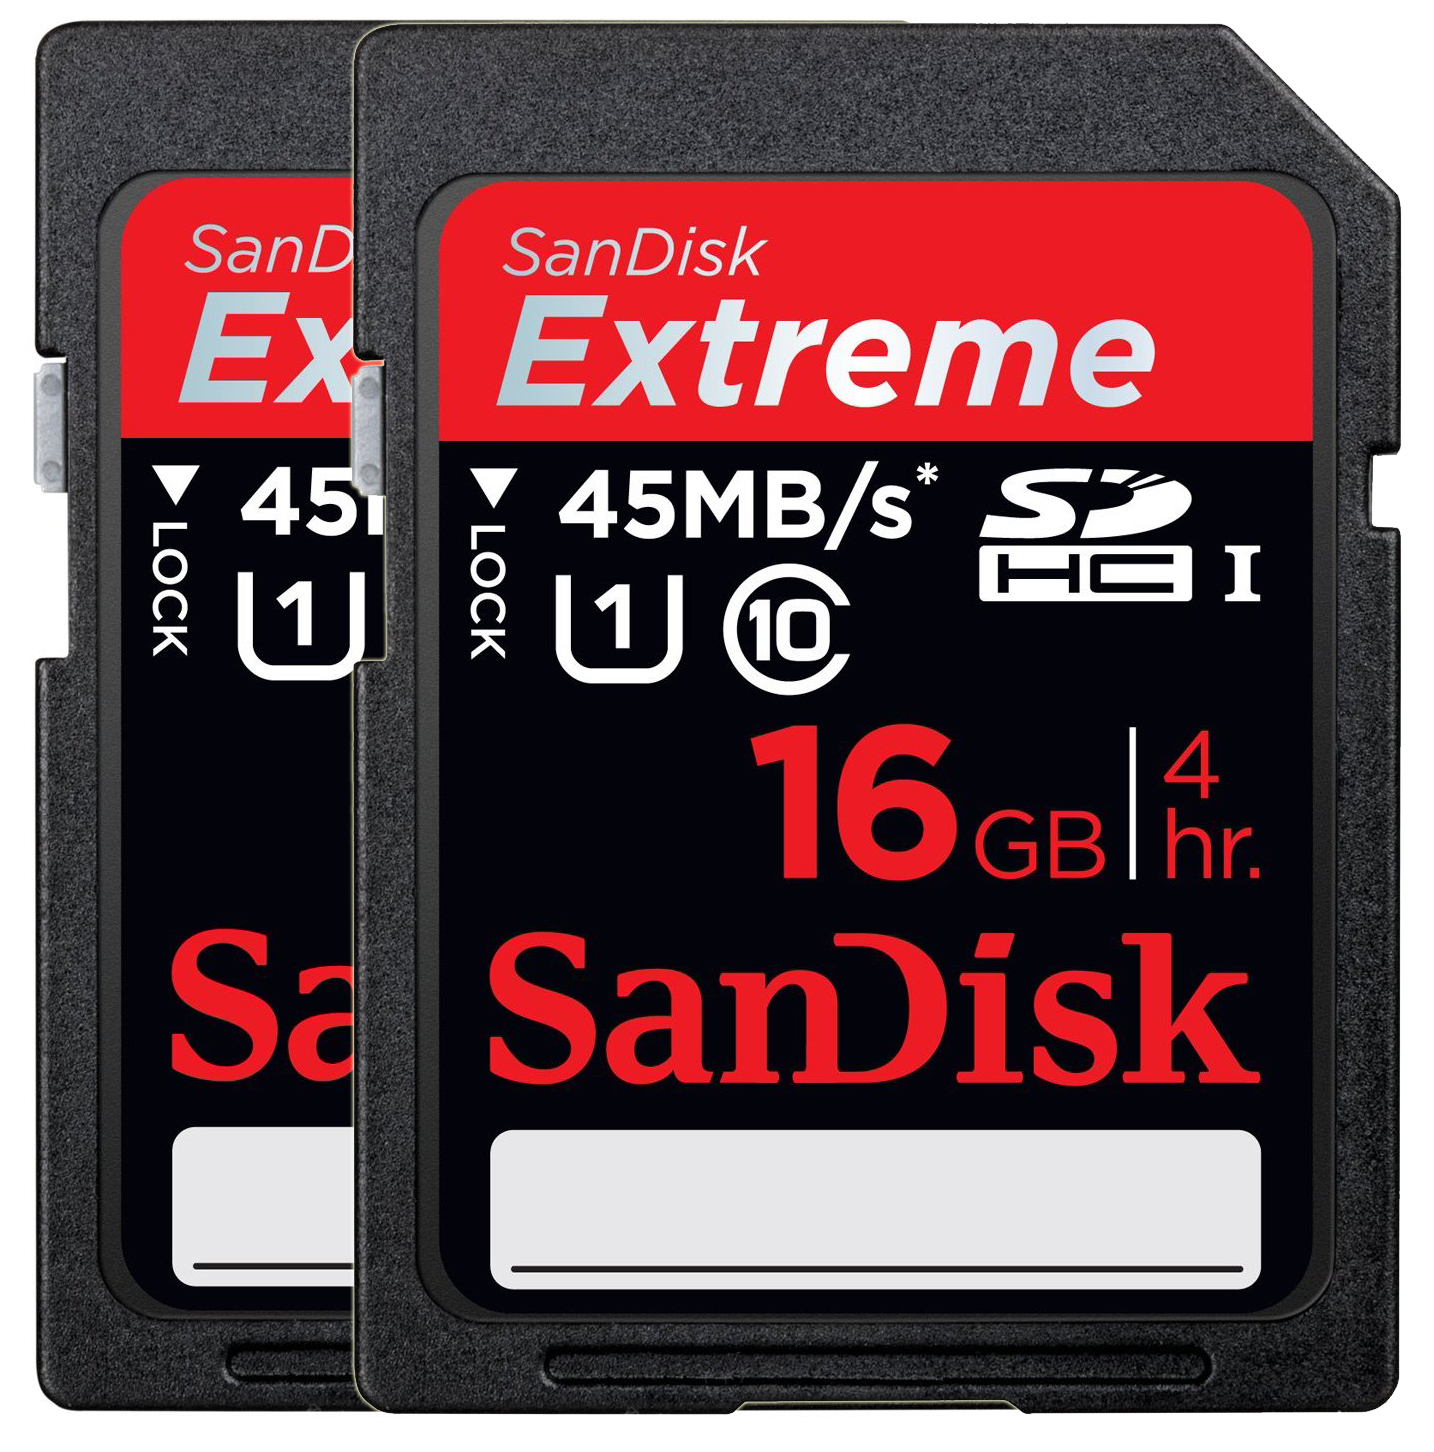 SanDisk Extreme HD Video SDHC Card 20MB/sec